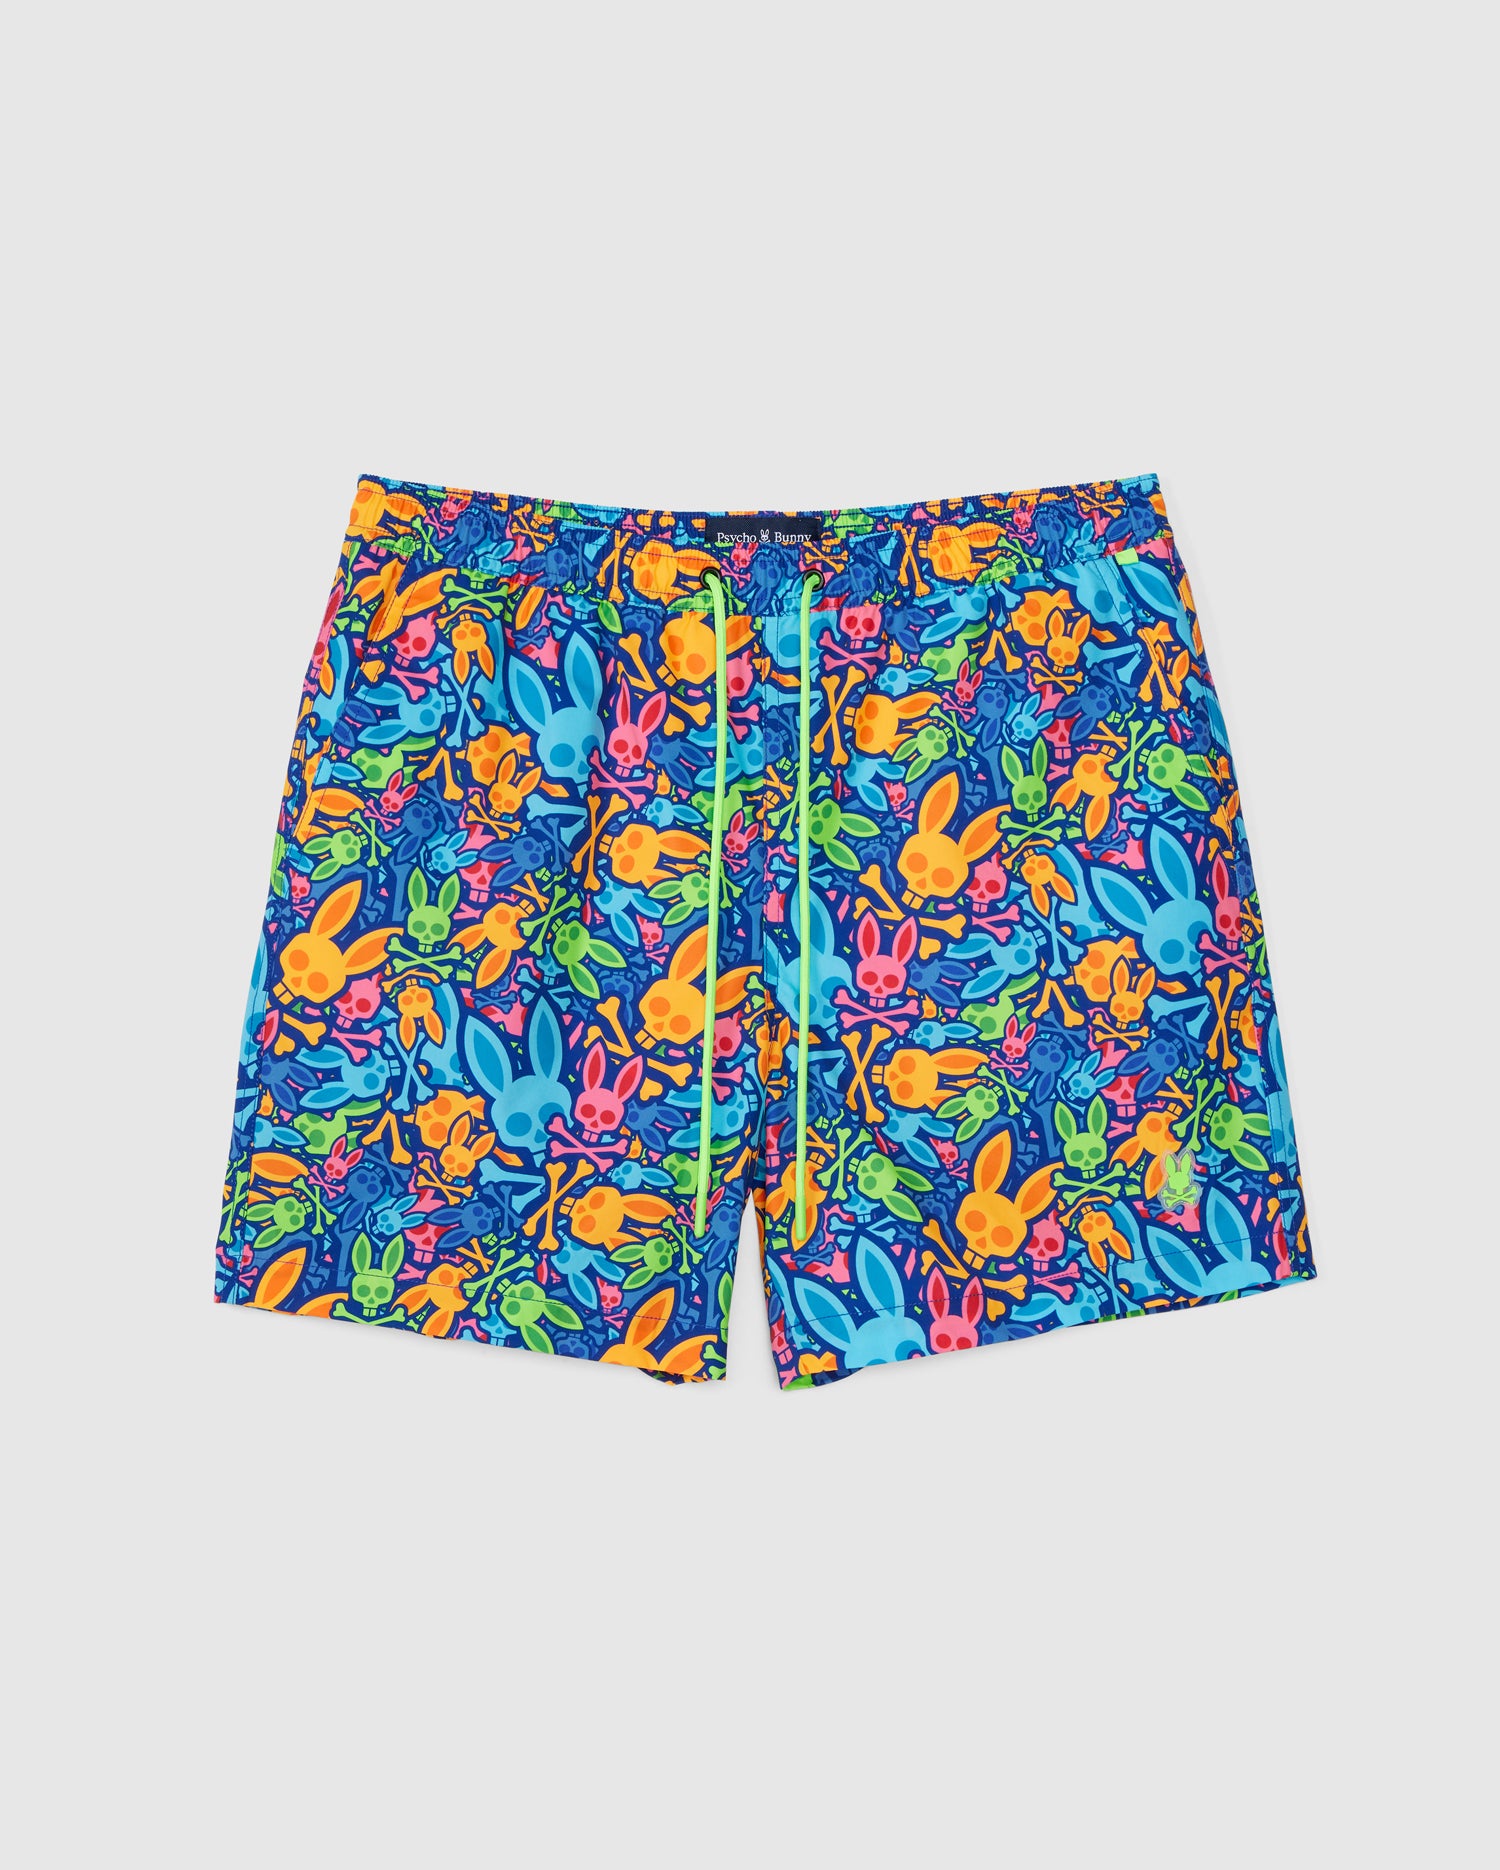 The Psycho Bunny MENS CLIFTON ALL OVER PRINT SWIM TRUNK - B6W441C200 features a bright and playful bunny print on a blue background. These men's swim trunks come with an elastic waistband, a central white drawstring, and a quick-dry shell for ultimate comfort.